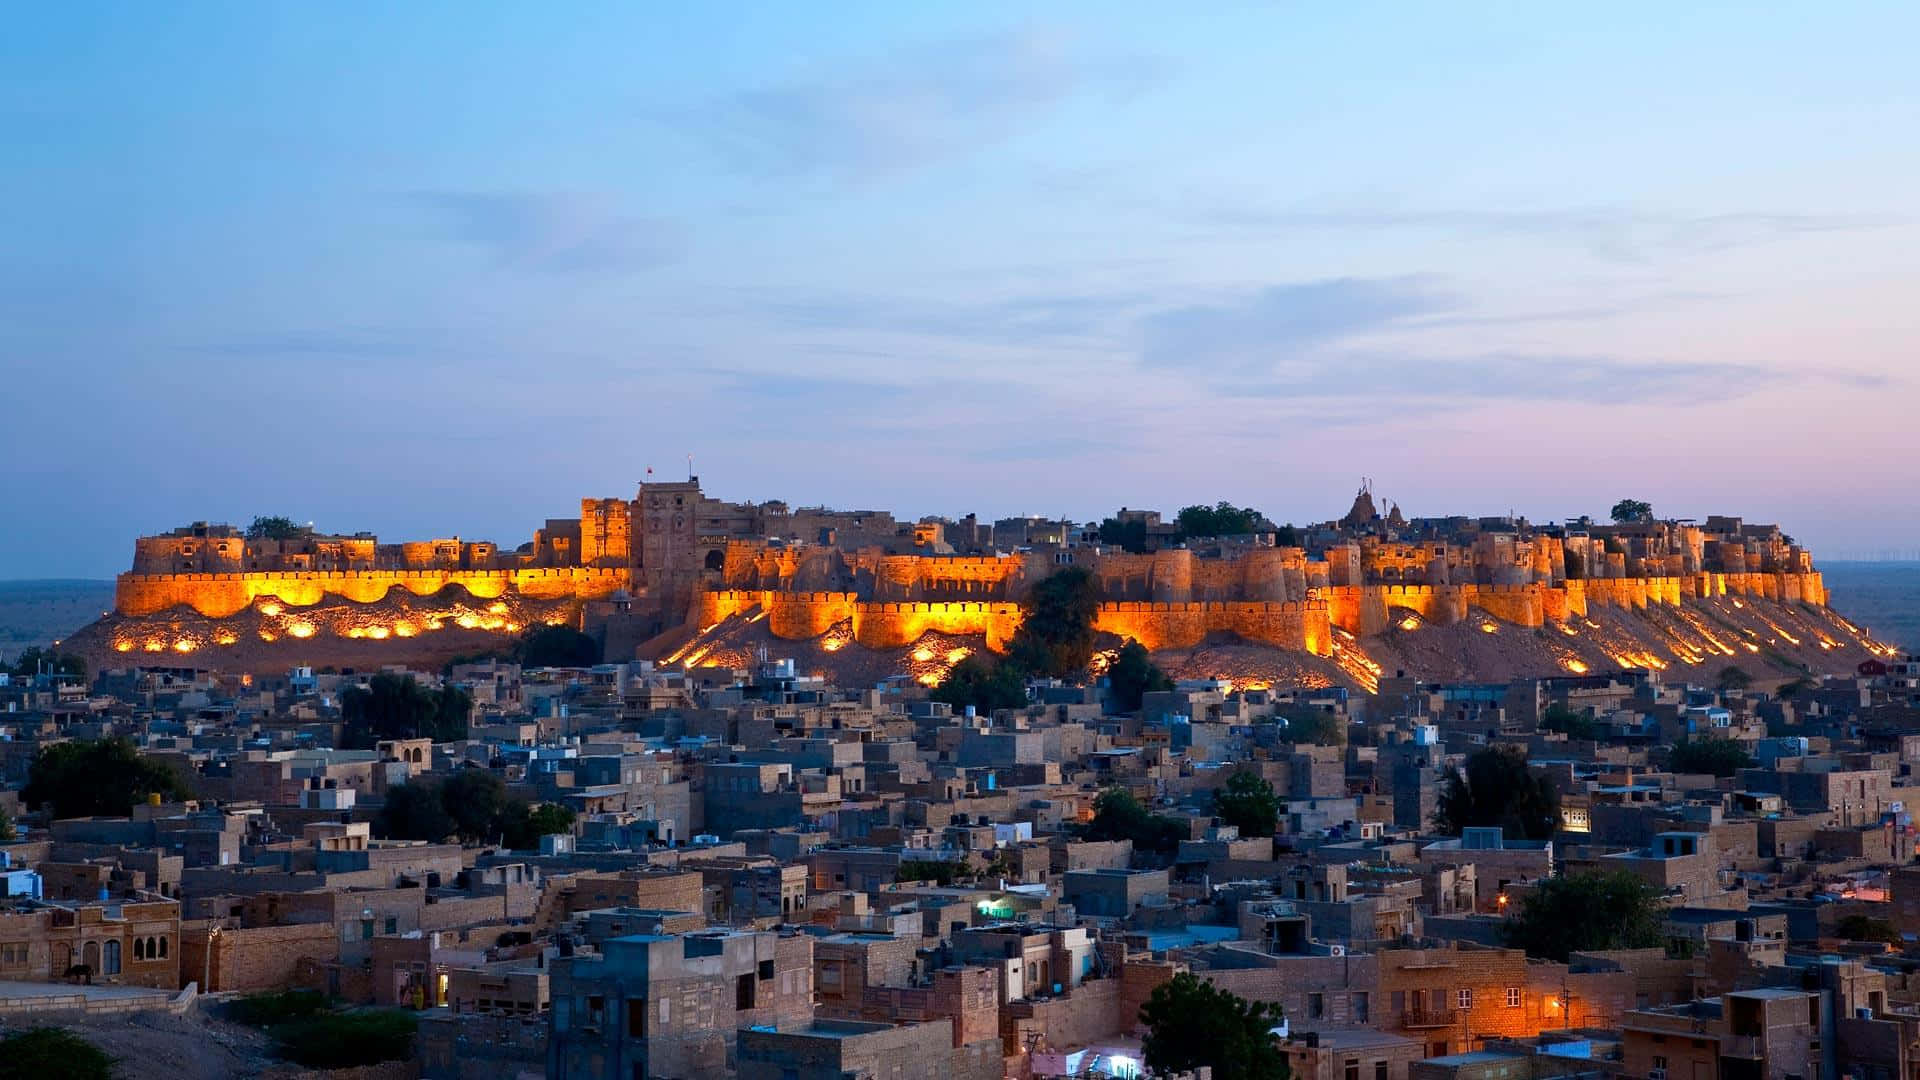 Rajasthan Skies: Traditional and Vibrant Architecture in the Desert